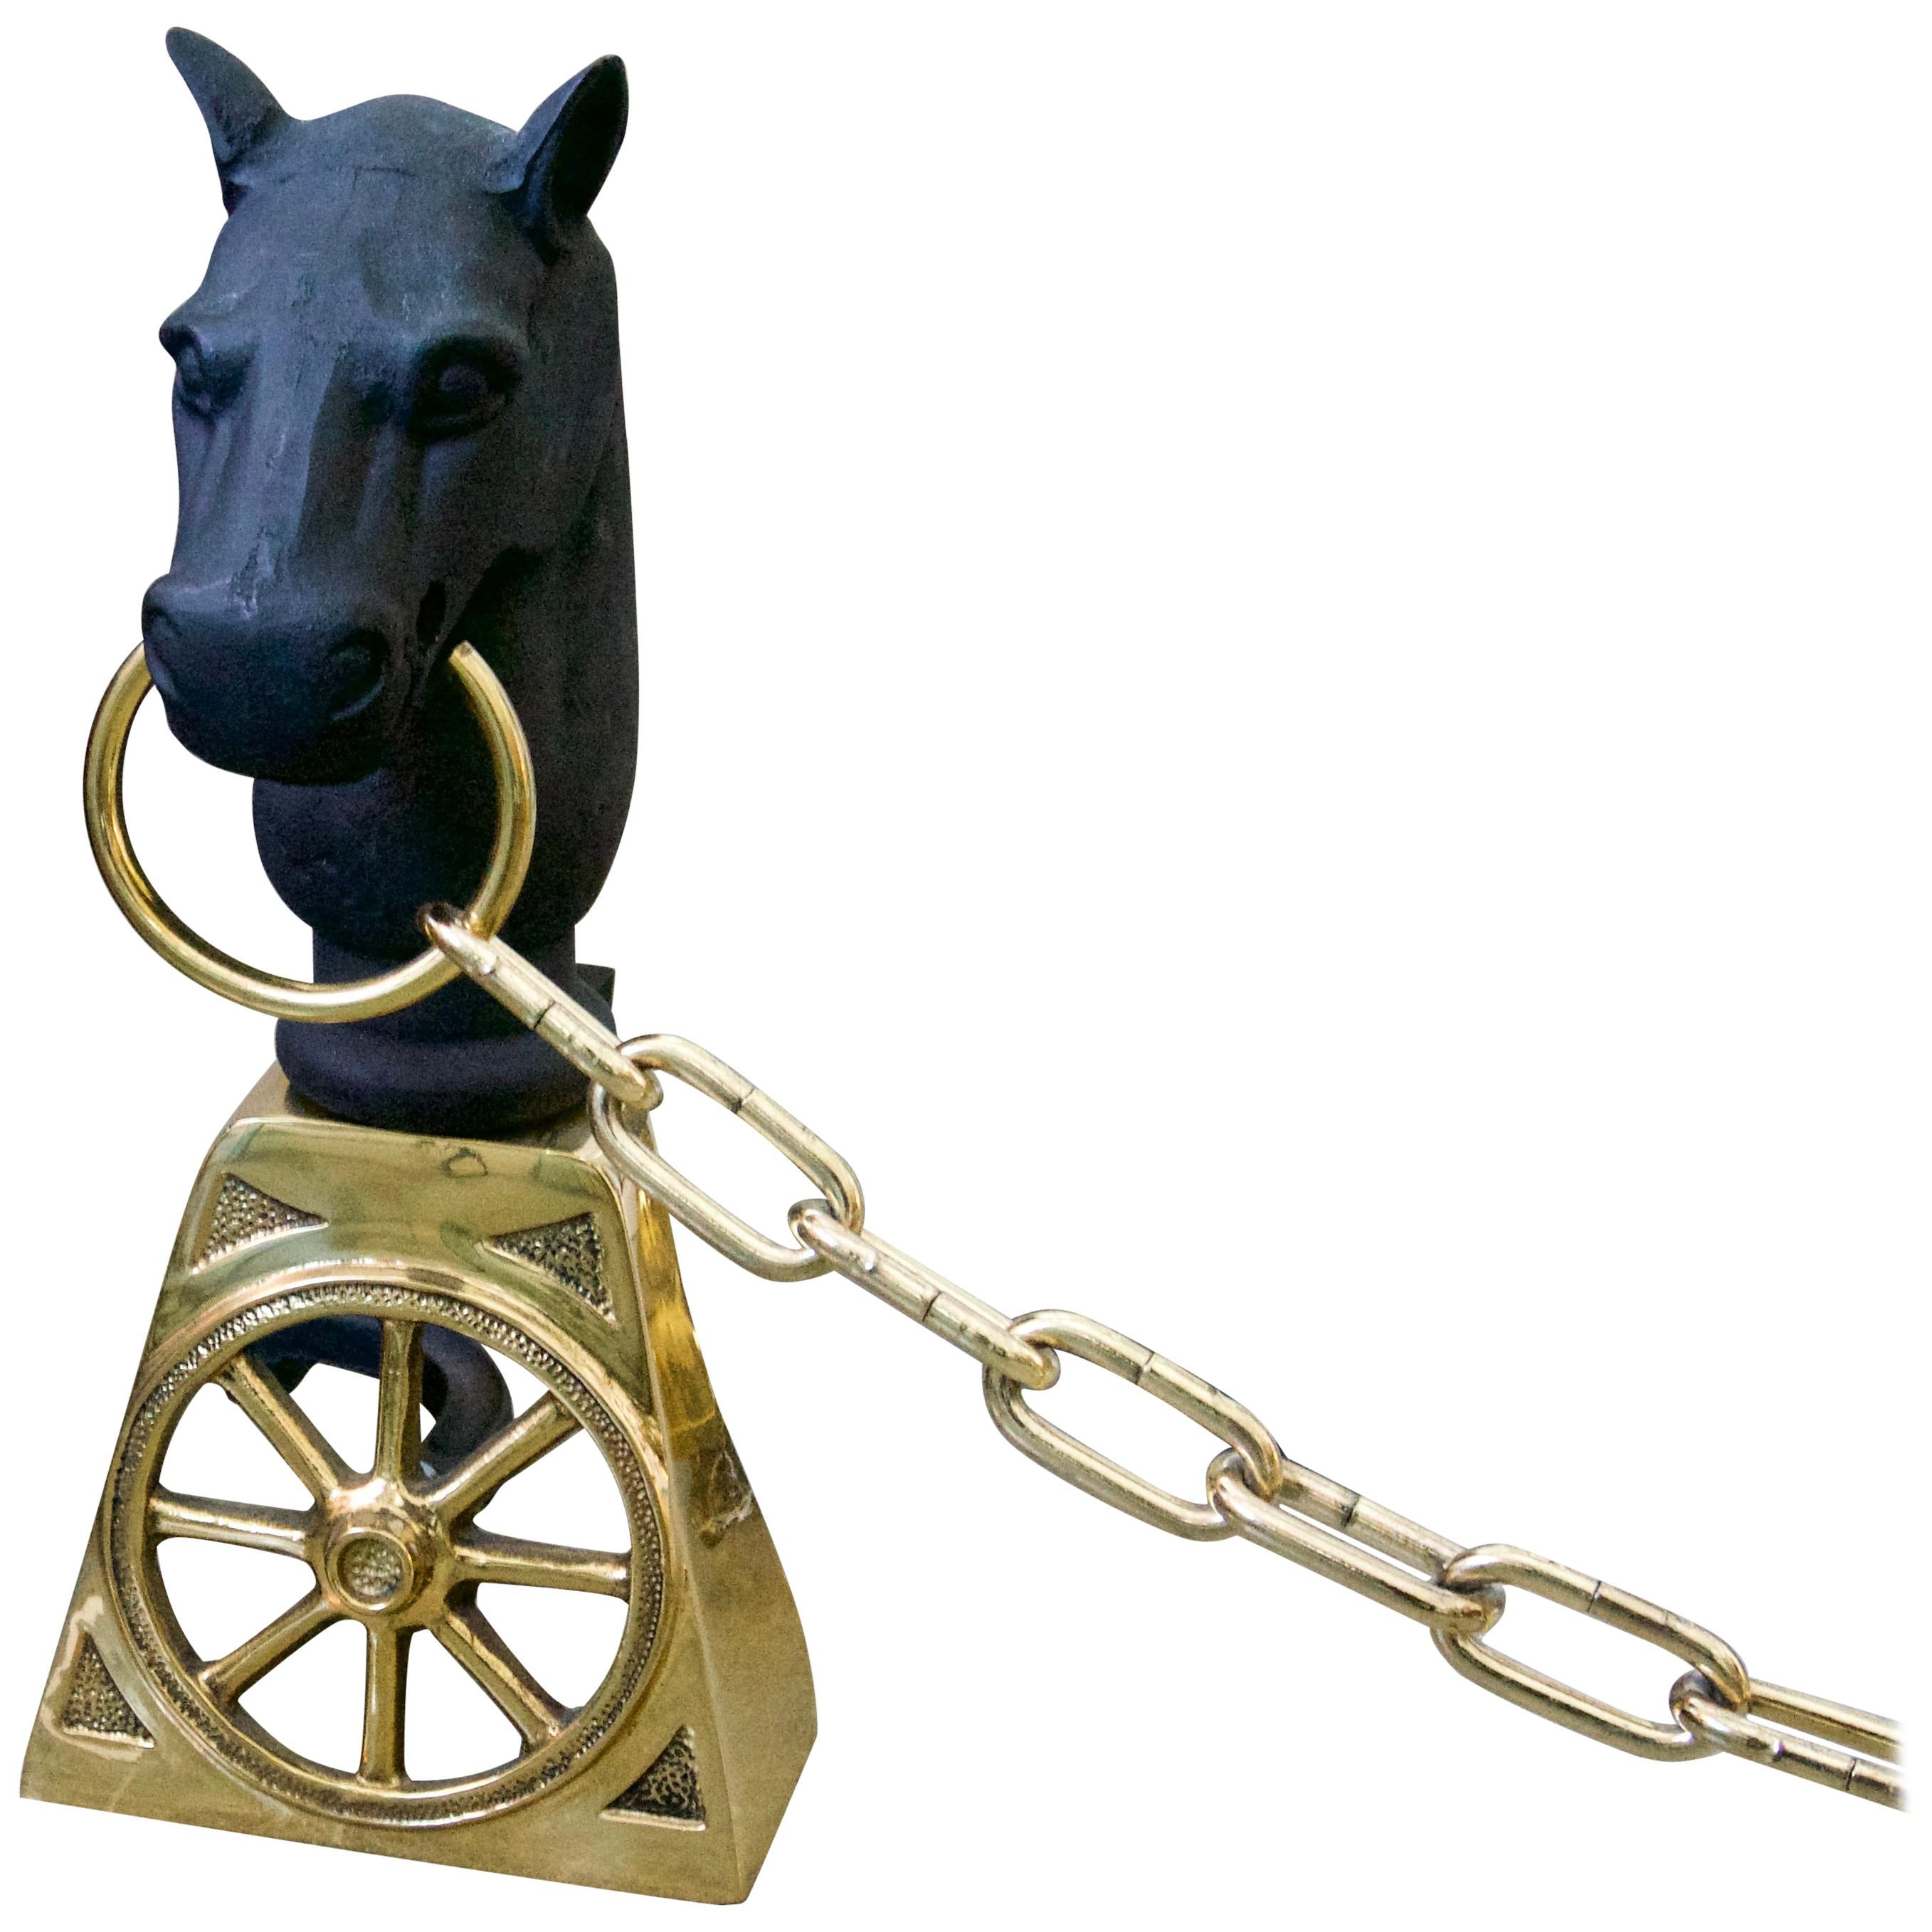 This stylish set of andirons will make the perfect addition to your cabin, horse farm or lake house with its equestrian motif of polished brass horse heads and chain.

The set has been professionally polished and lacquered so no tarnishing of the